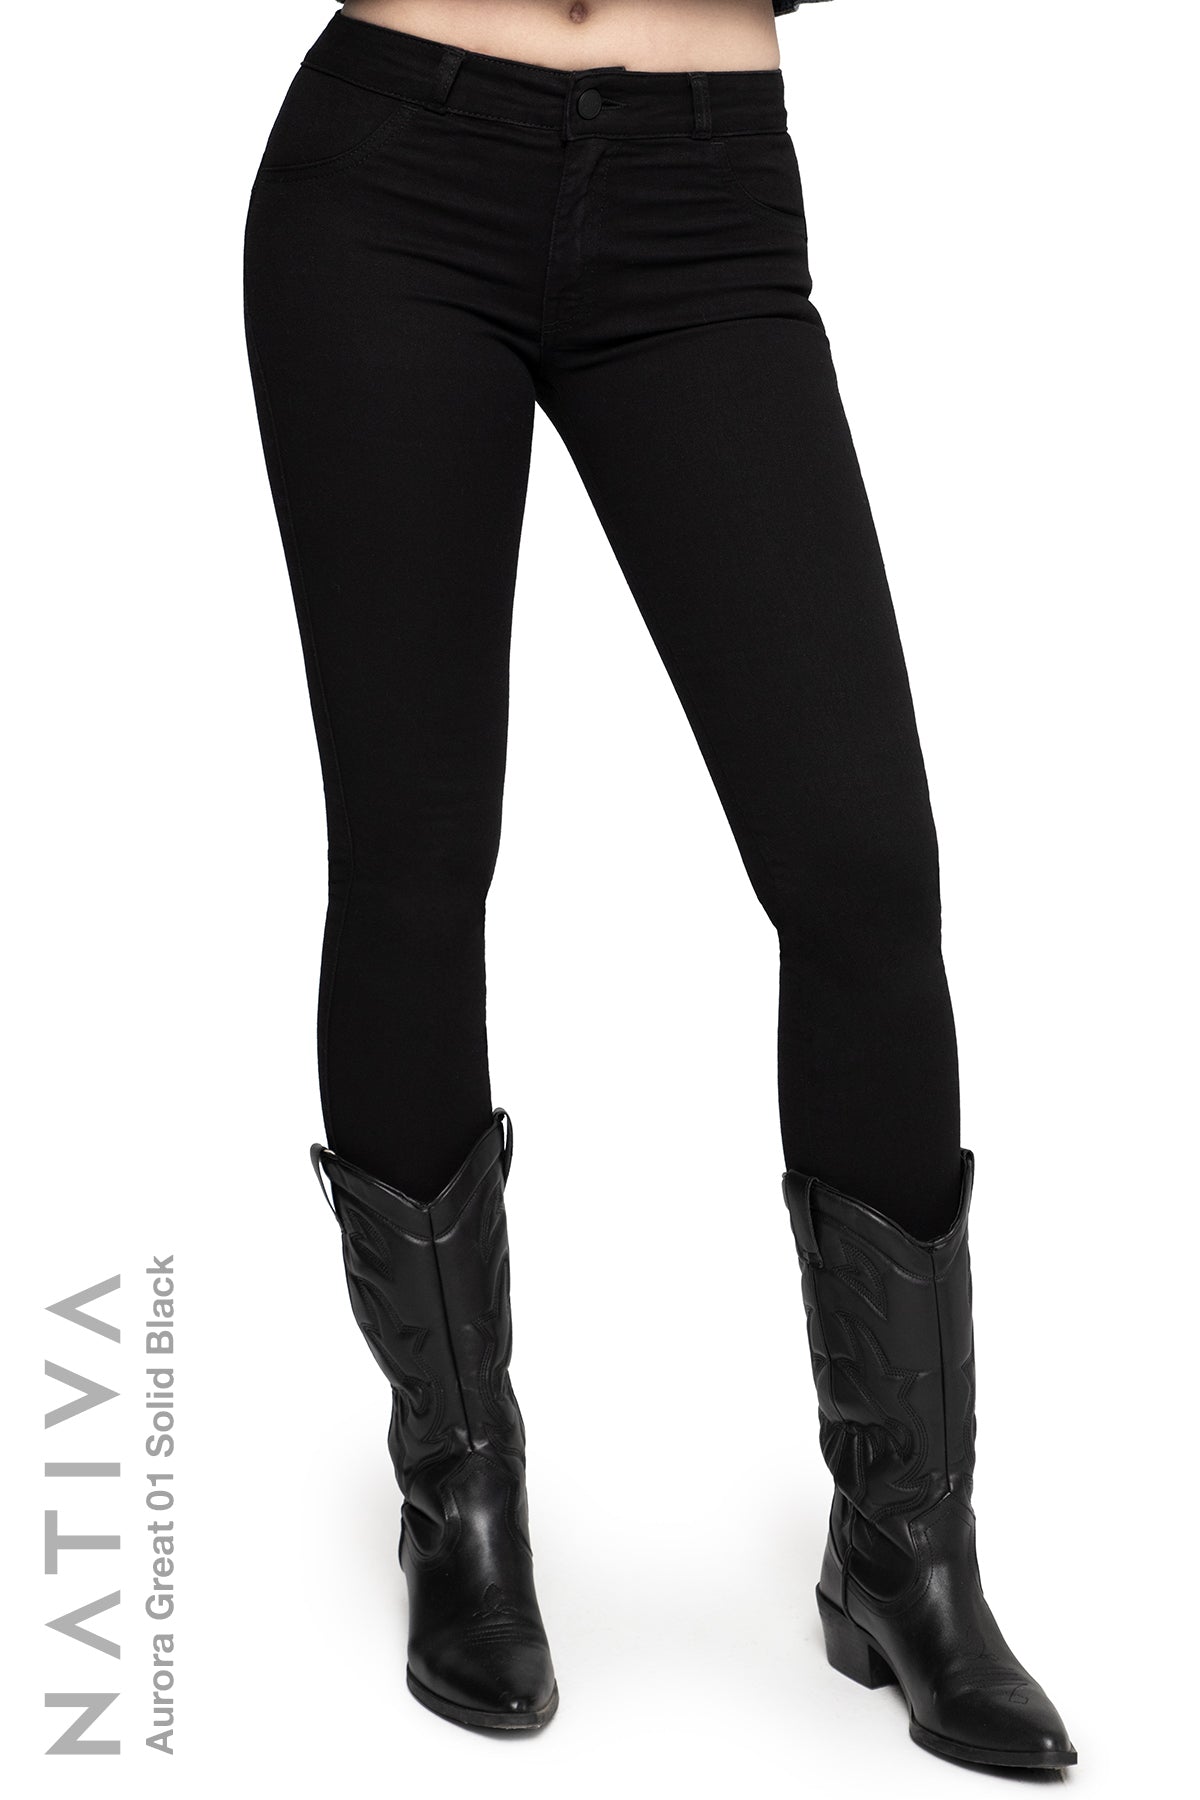 NATIVA, STRETCH JEANS. AURORA GREAT 01 BLACK, High Shaping Capacity,  All-Season Wear, Mid-Waisted Super Skinny Jeans